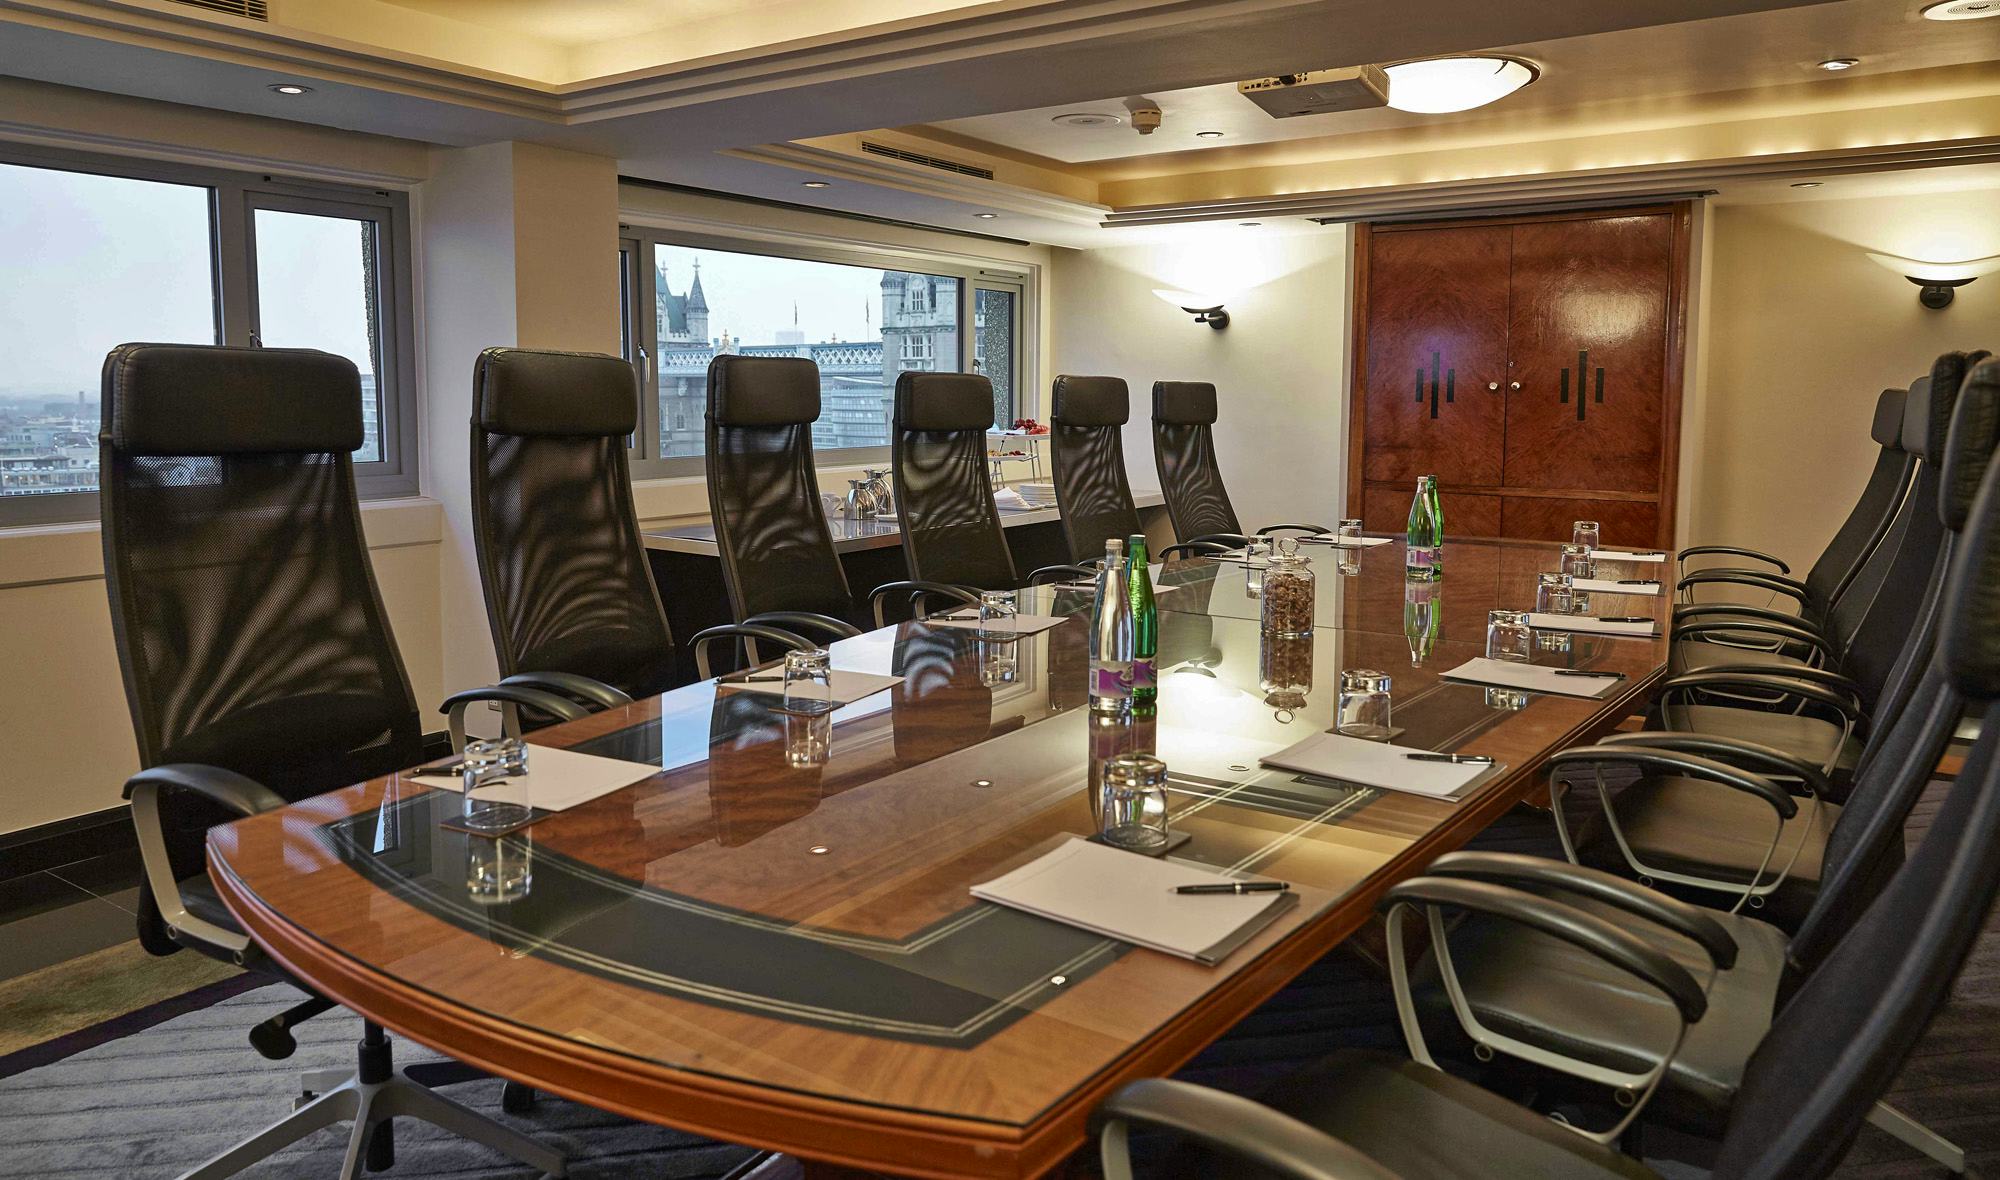 Tower Bridge hourly meeting rooms event bookers london